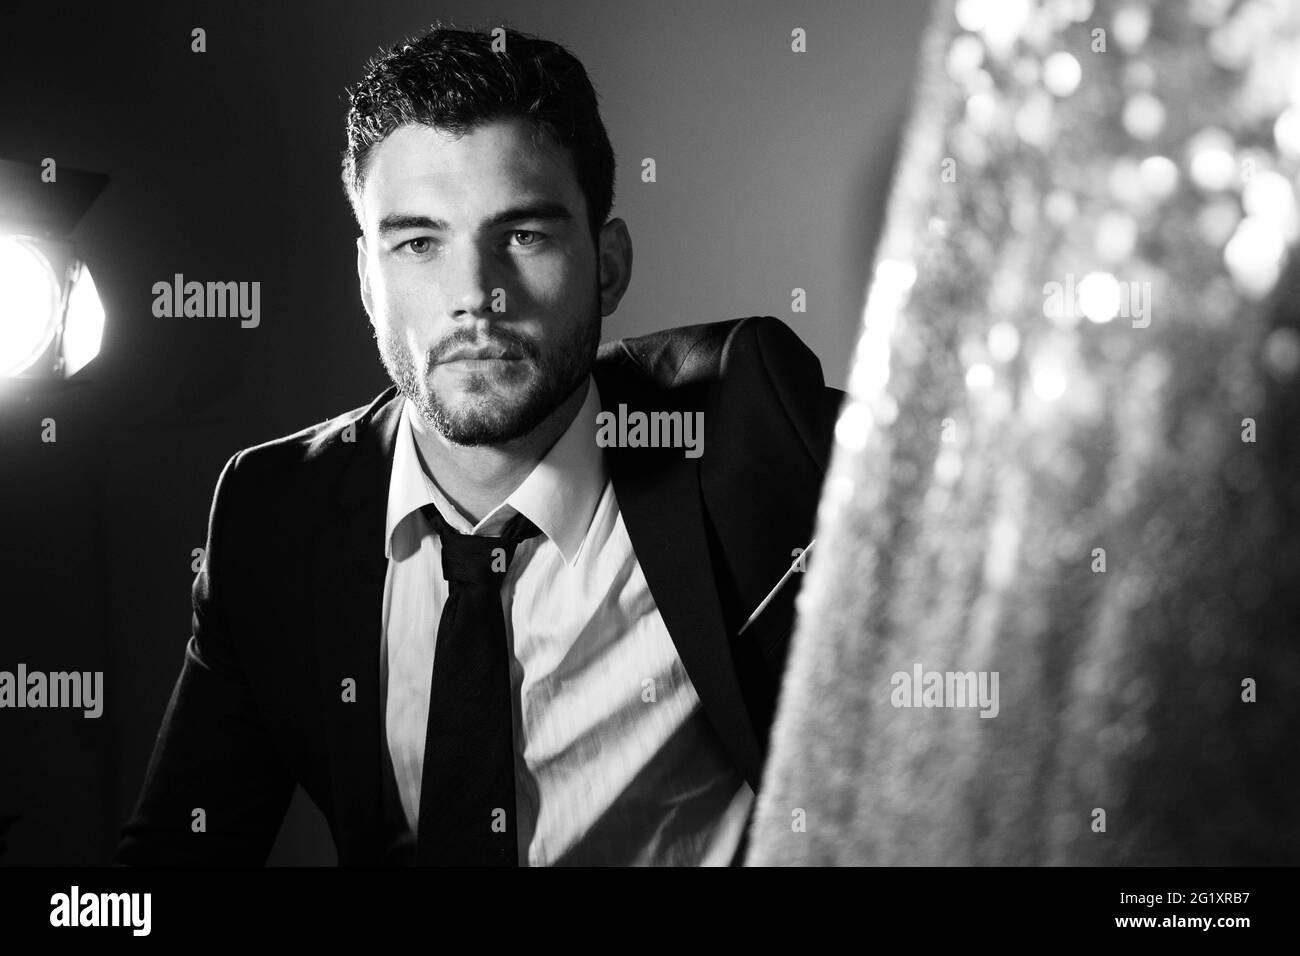 Attractive man wearing suit sitting next to glitter curtain, looking at camera with spotlight in background Stock Photo